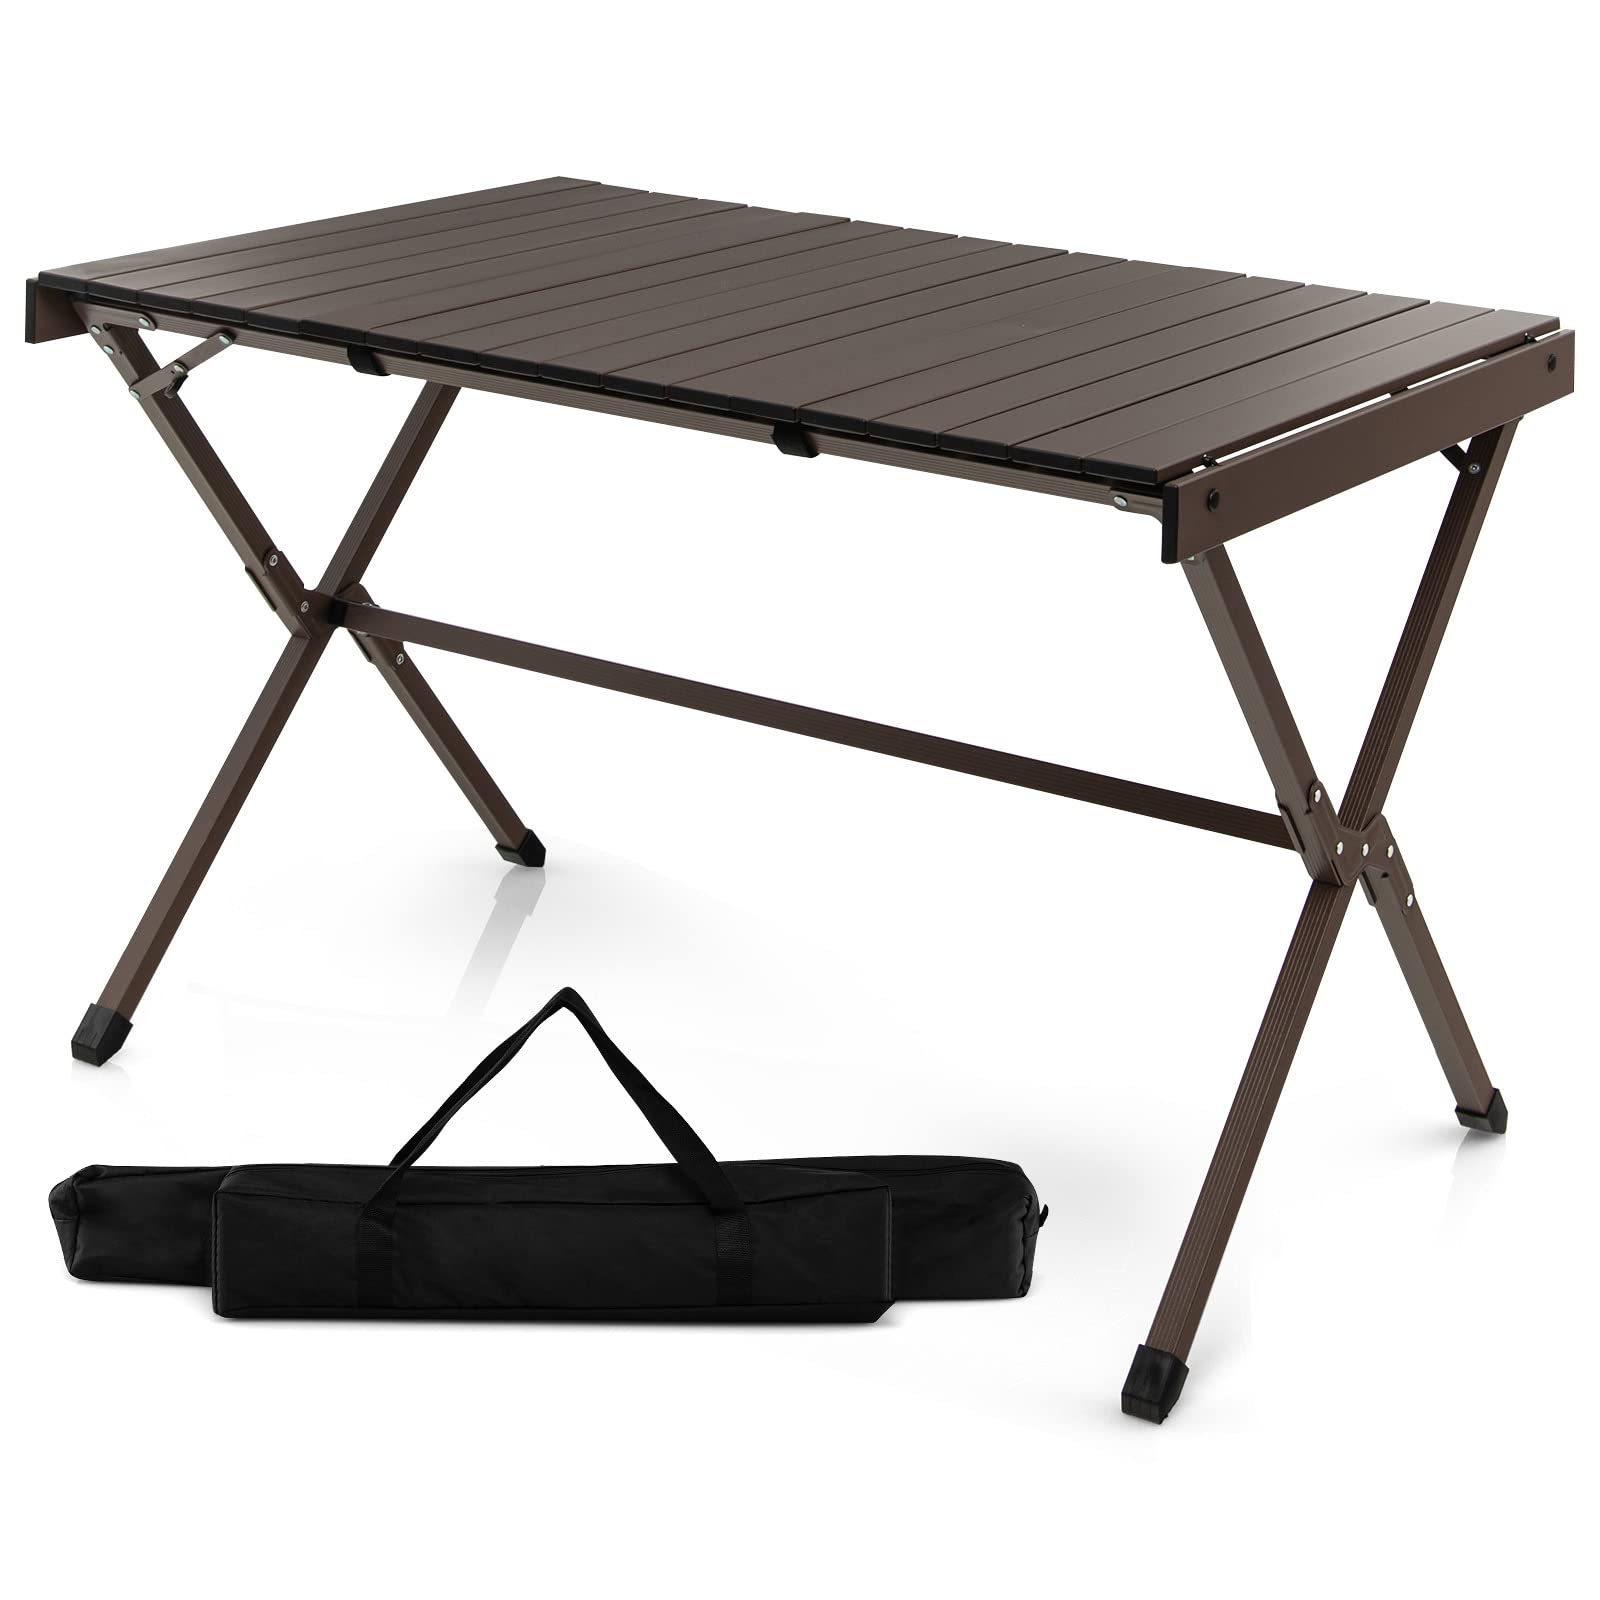 Giantex Folding Camping Table, Aluminum Picnic Table for 4-6 Person